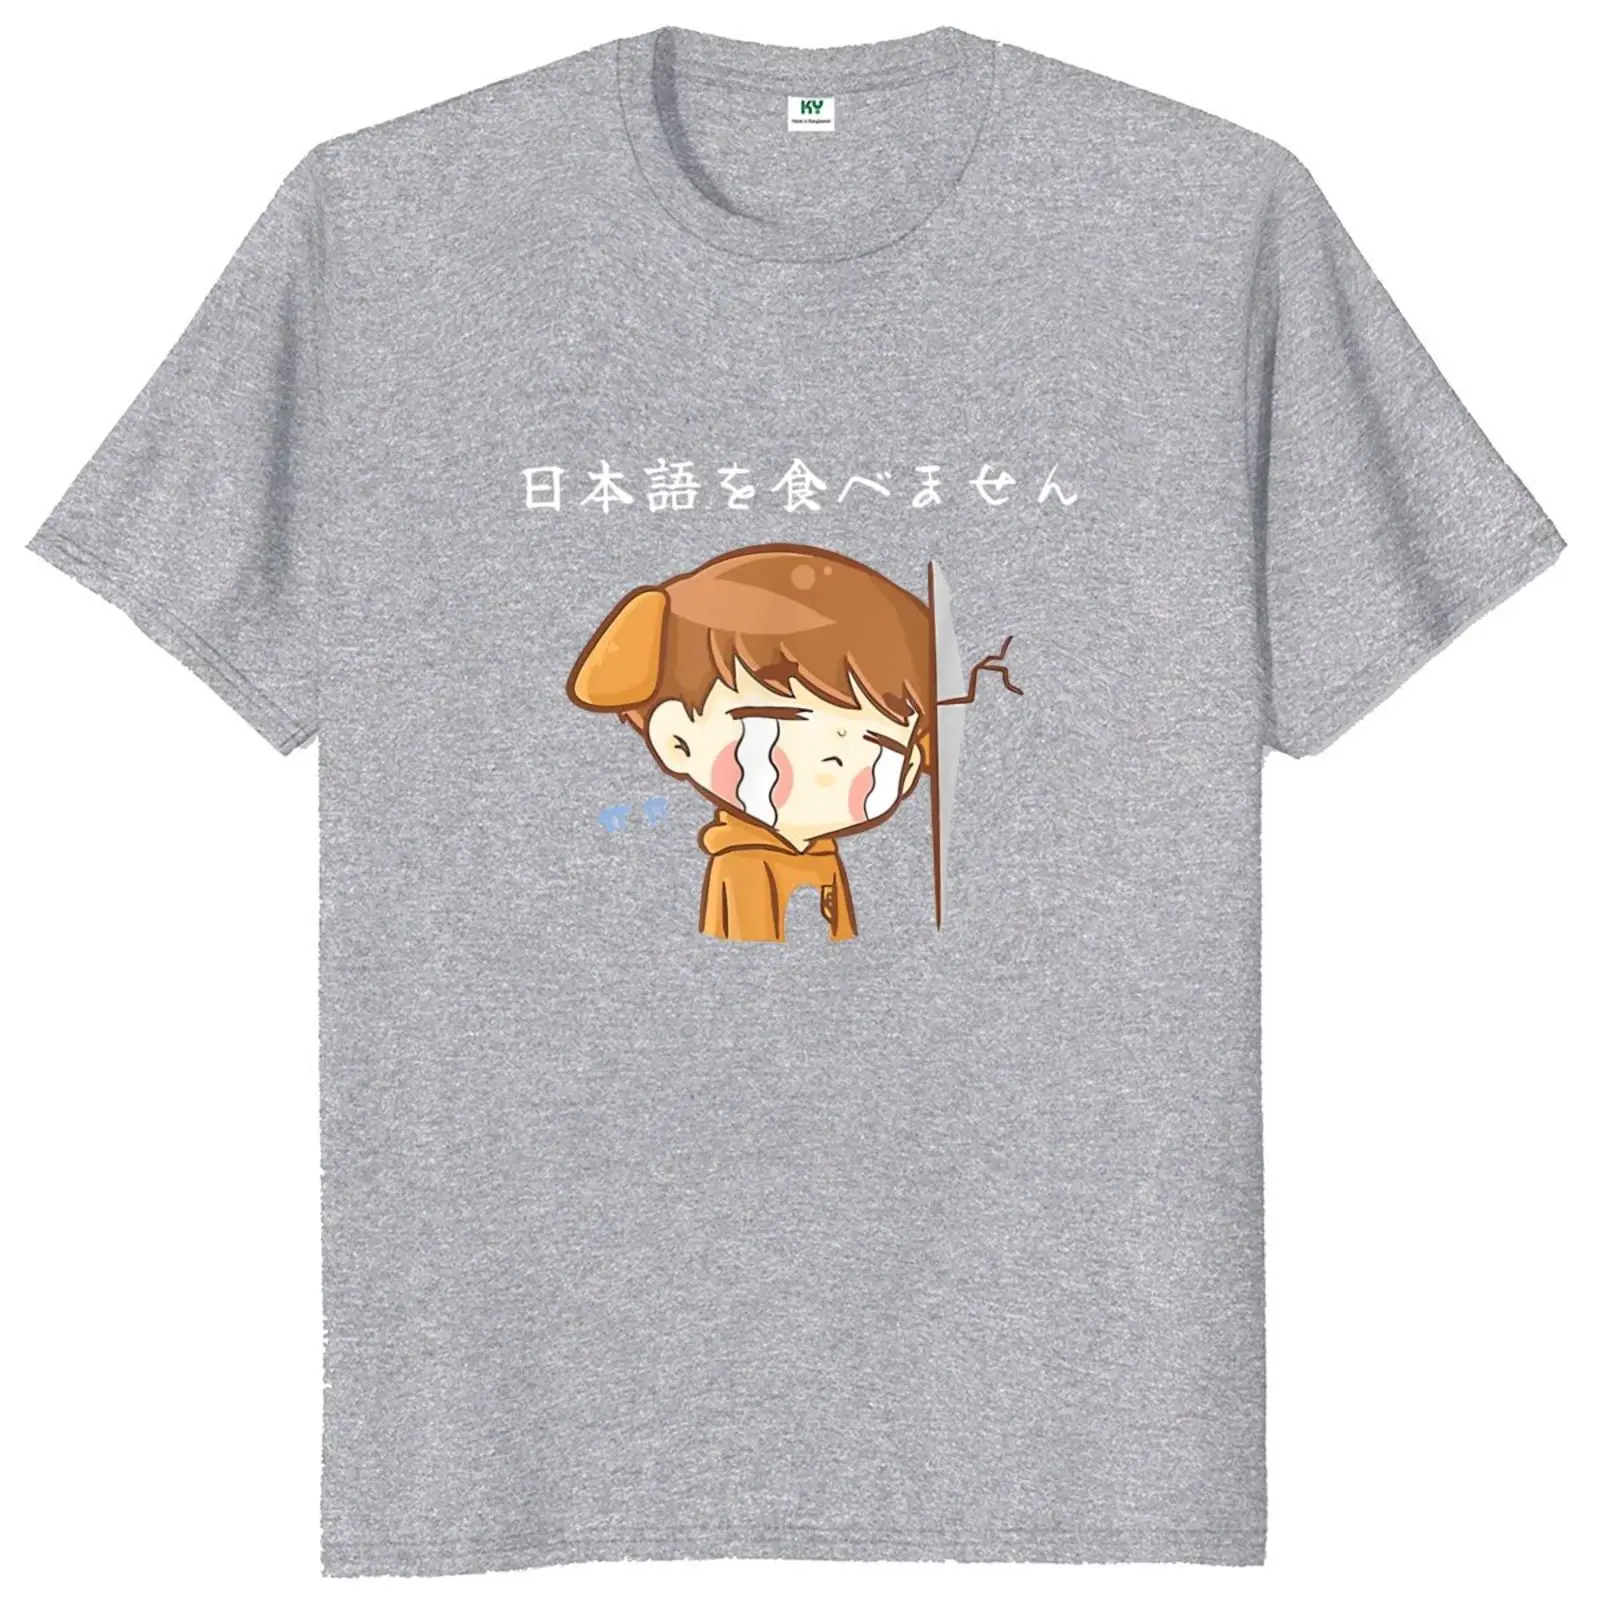 

I Don't Eat Japanese Funny T Shirt With Japan Characters Japanese Is Difficult But Interesting Anime Aesthetic Tshirt